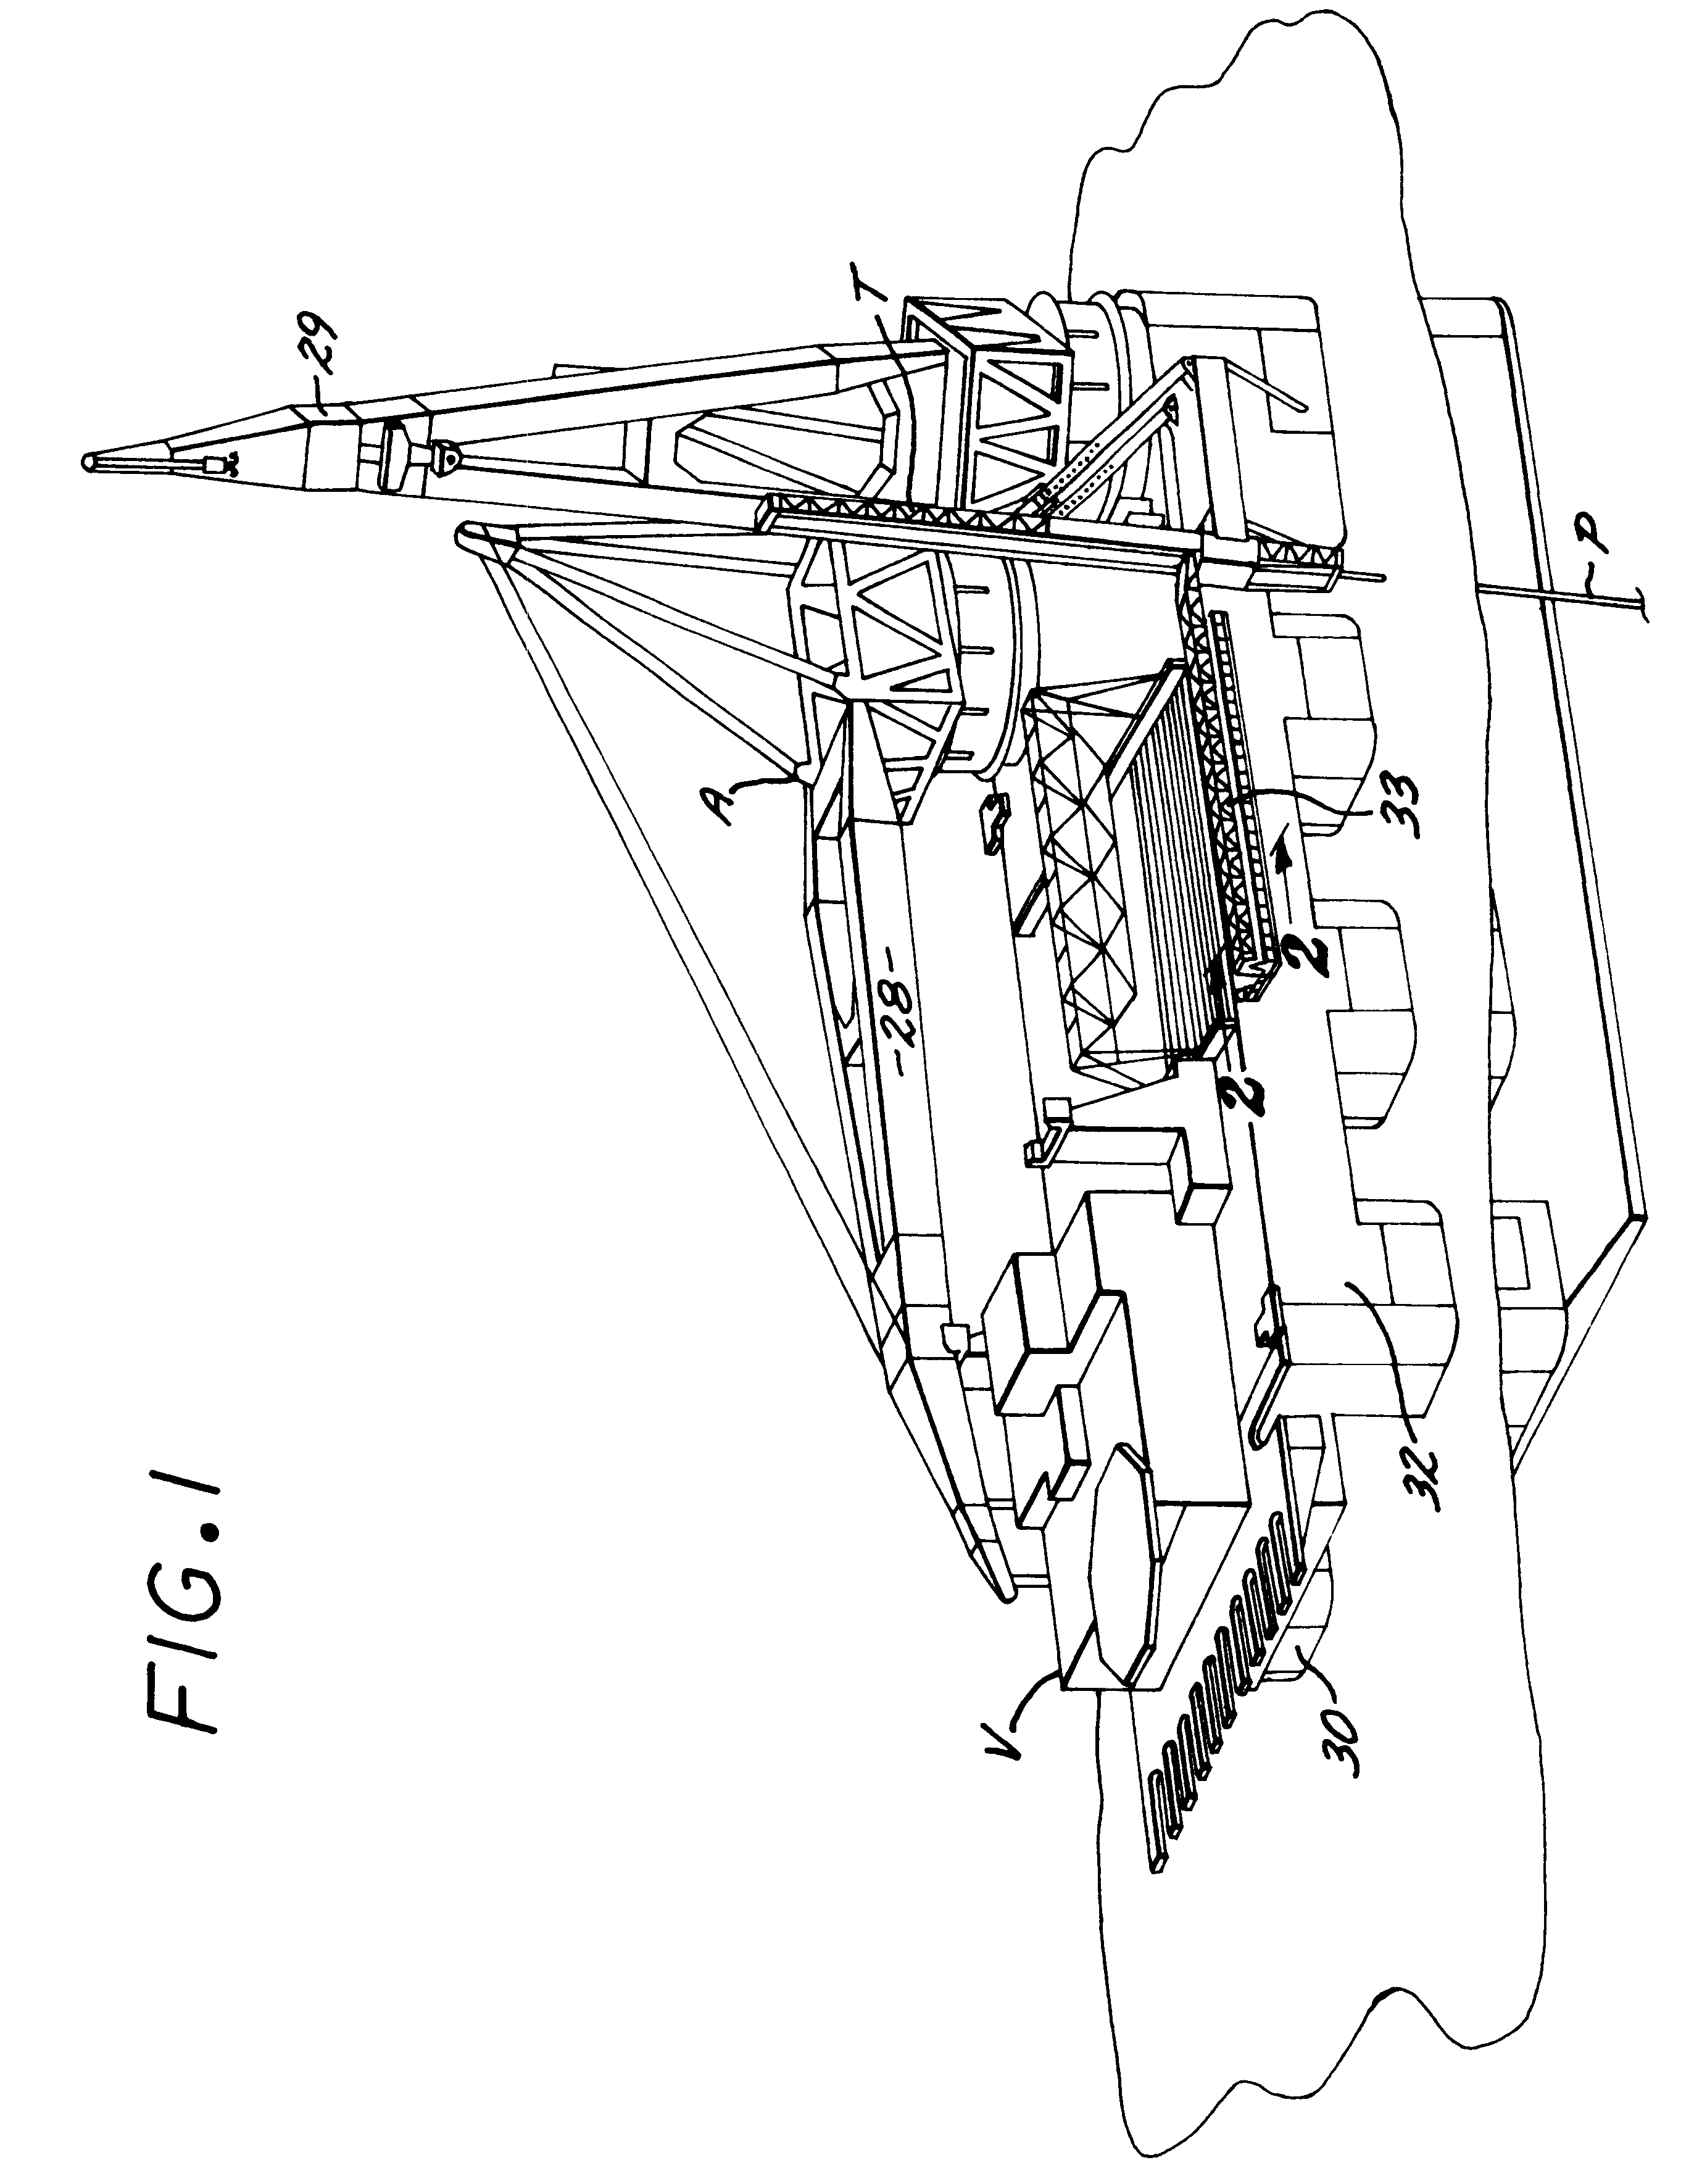 Underwater pipe laying method and apparatus